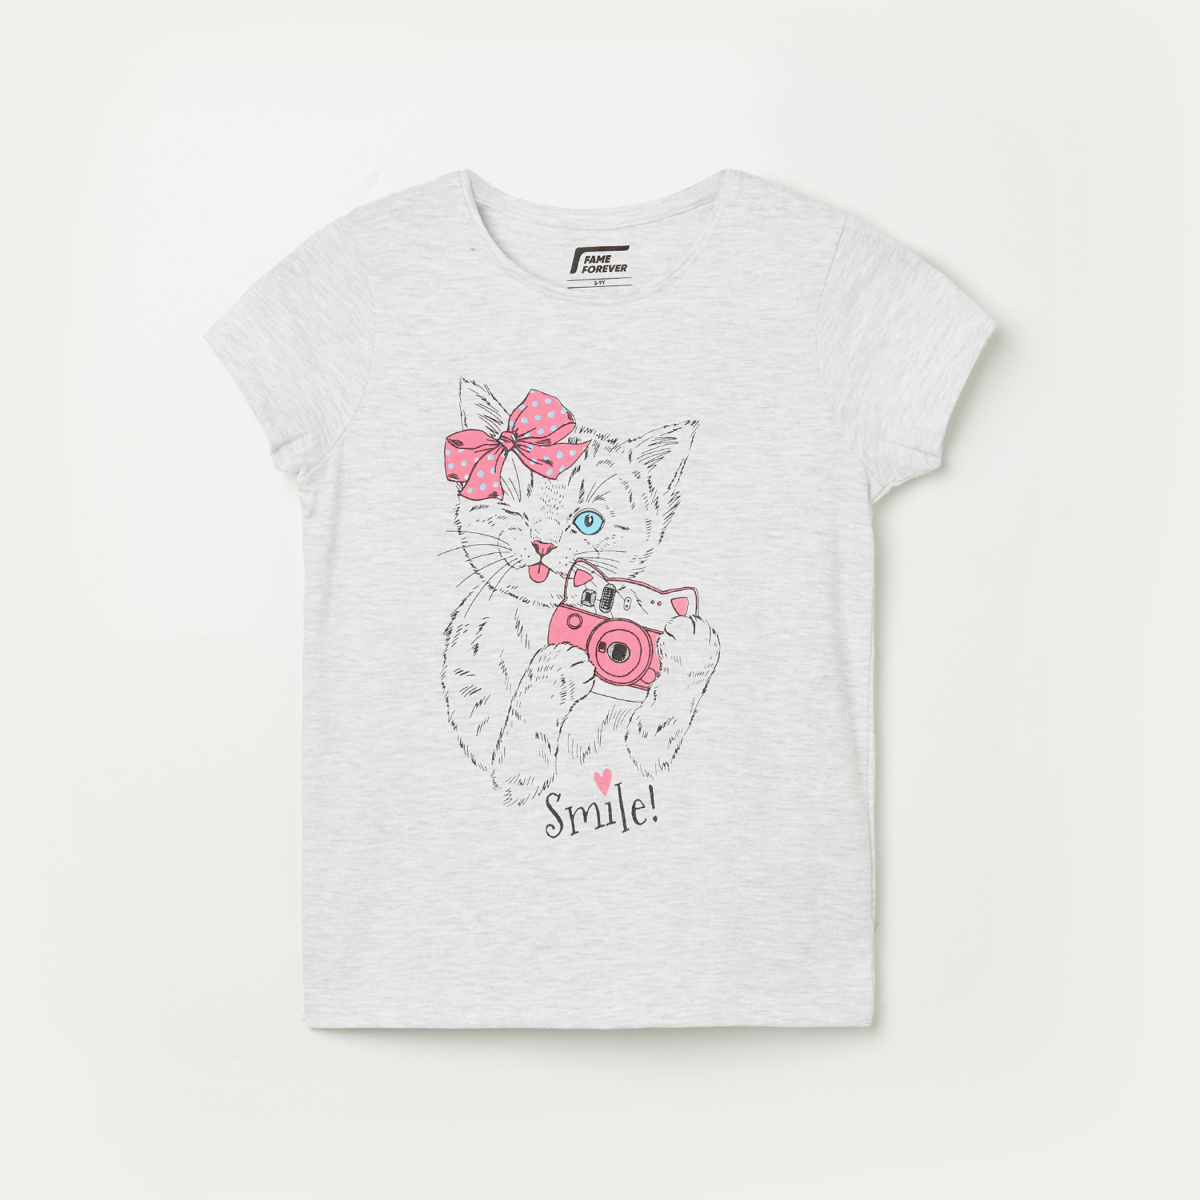 FAME FOREVER YOUNG Girls Graphic Print Round Neck T-shirt